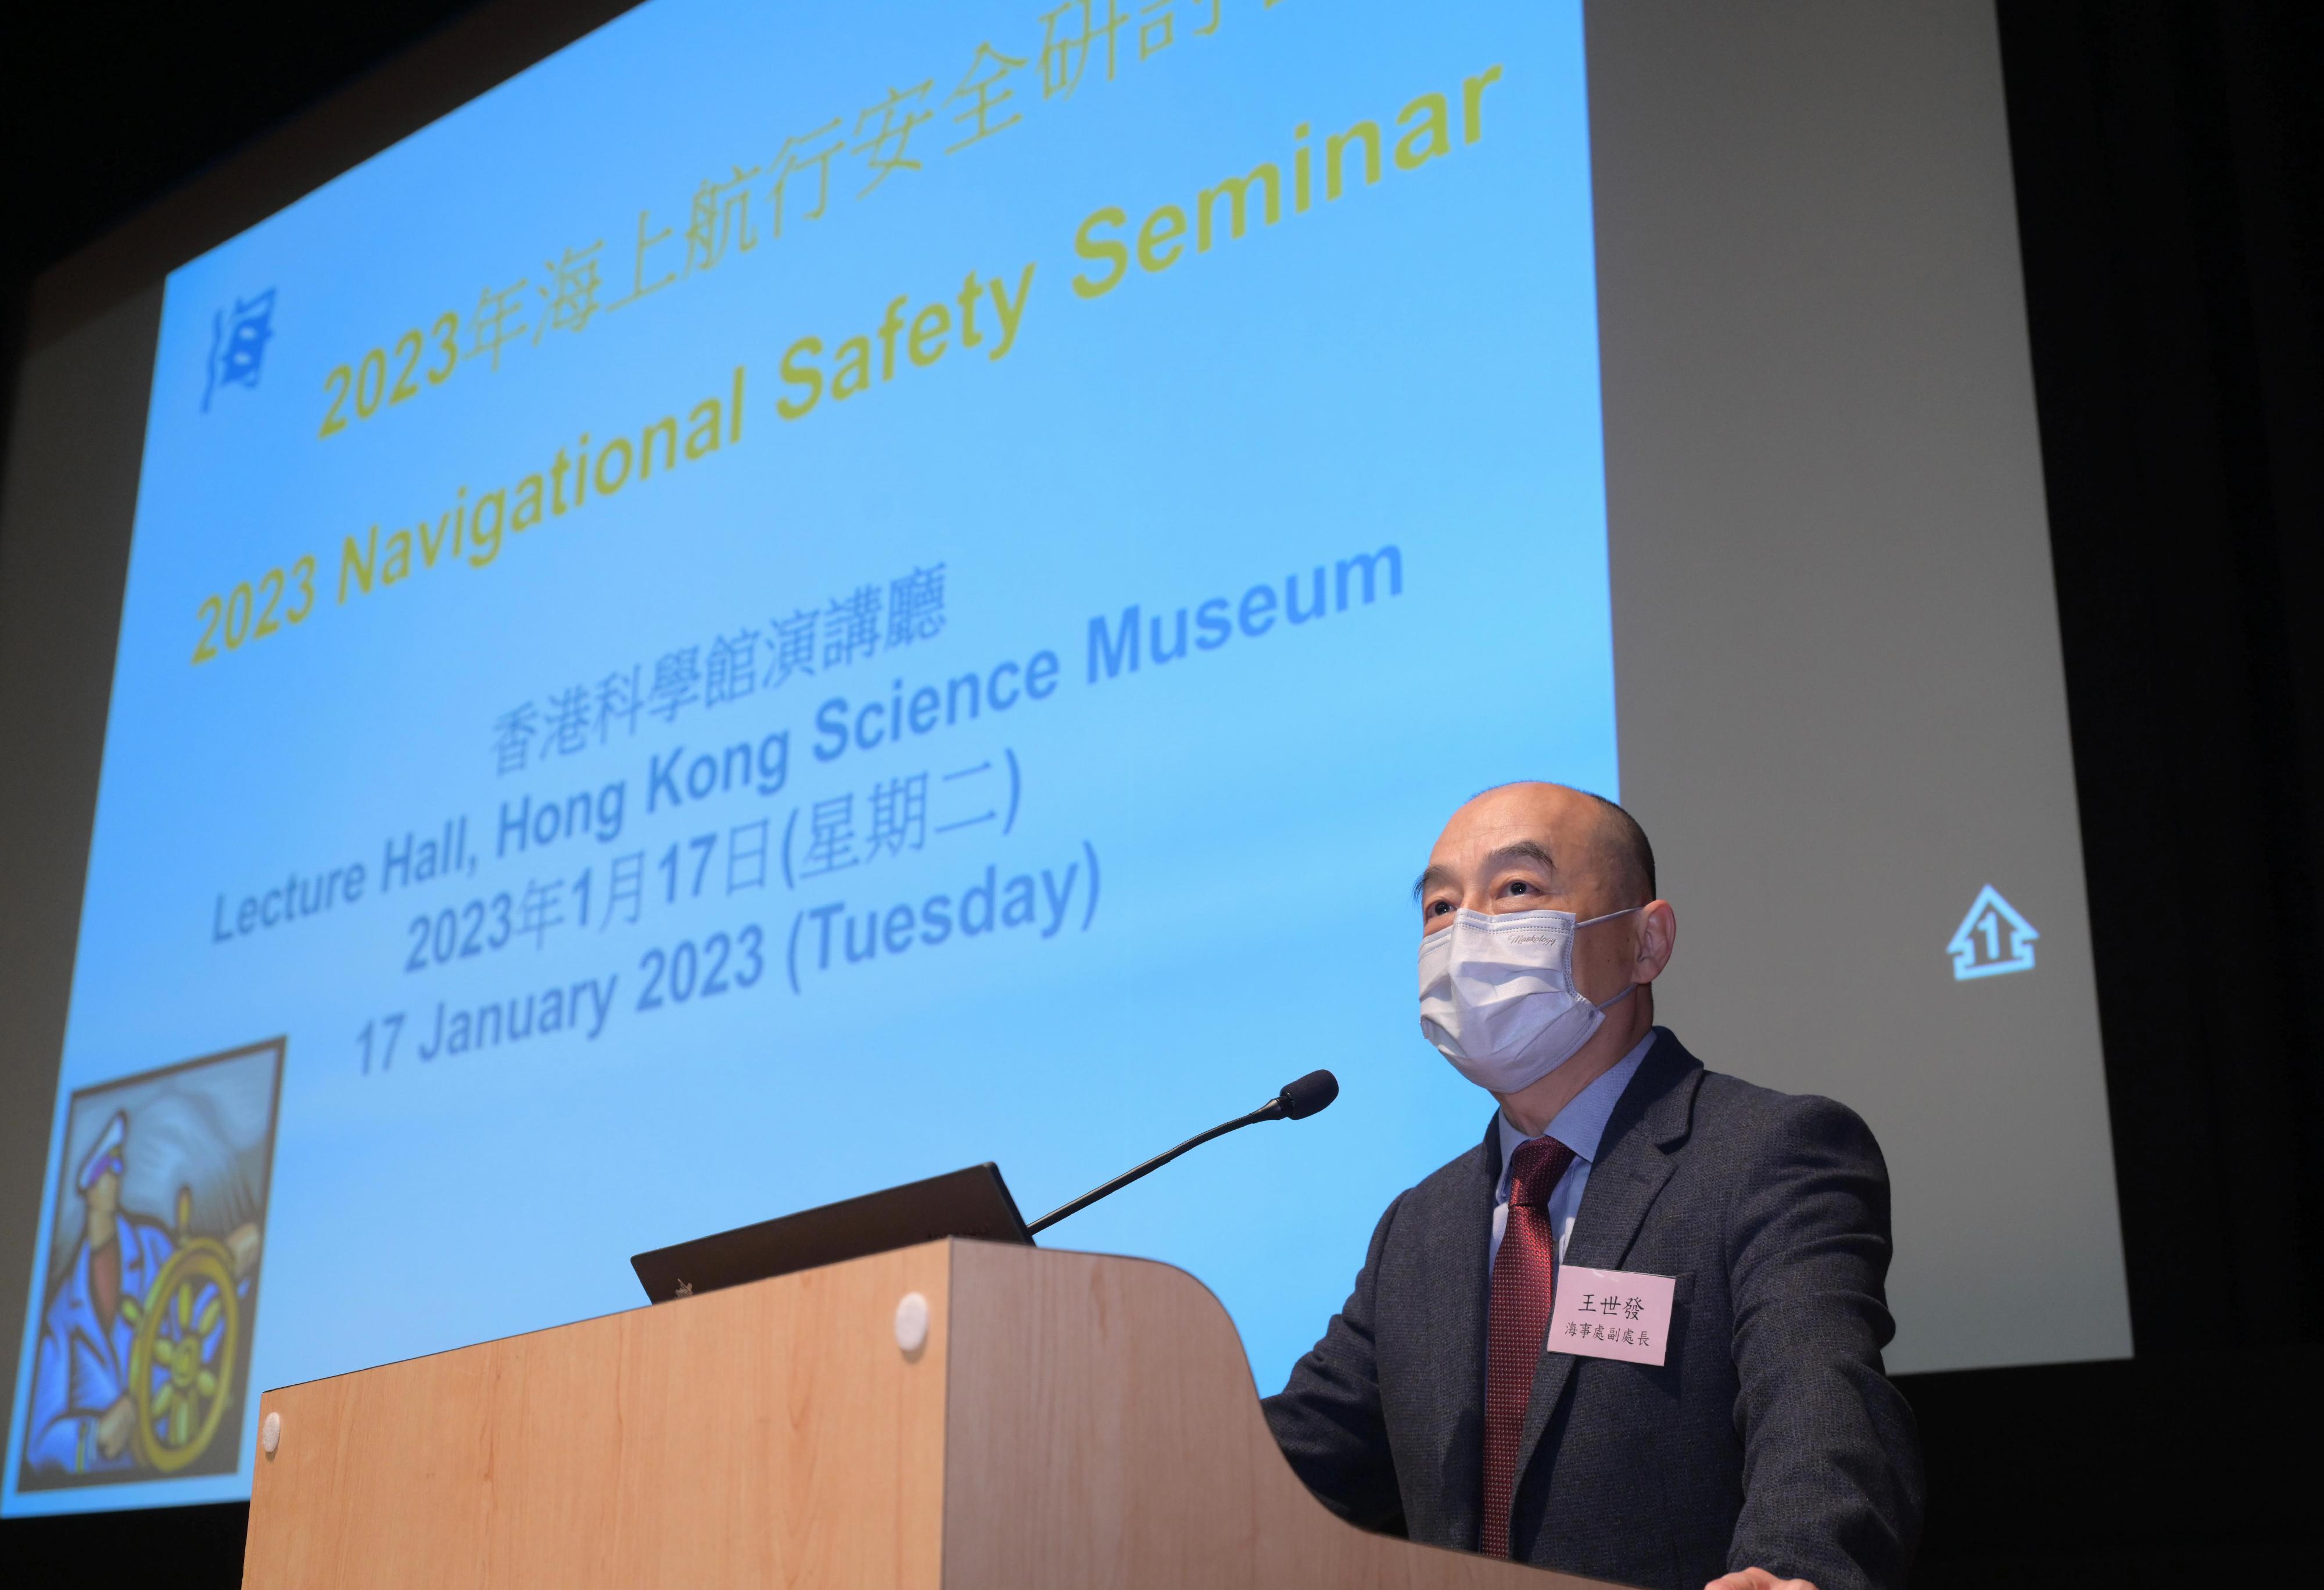 Speaking at the opening of the Navigational Safety Seminar 2023 today (January 17), Deputy Director of Marine Mr Wong Sai-fat reminded coxswains and persons-in-charge of vessels that they have the responsibility to uphold safety at sea and fully comply with marine legislation.
